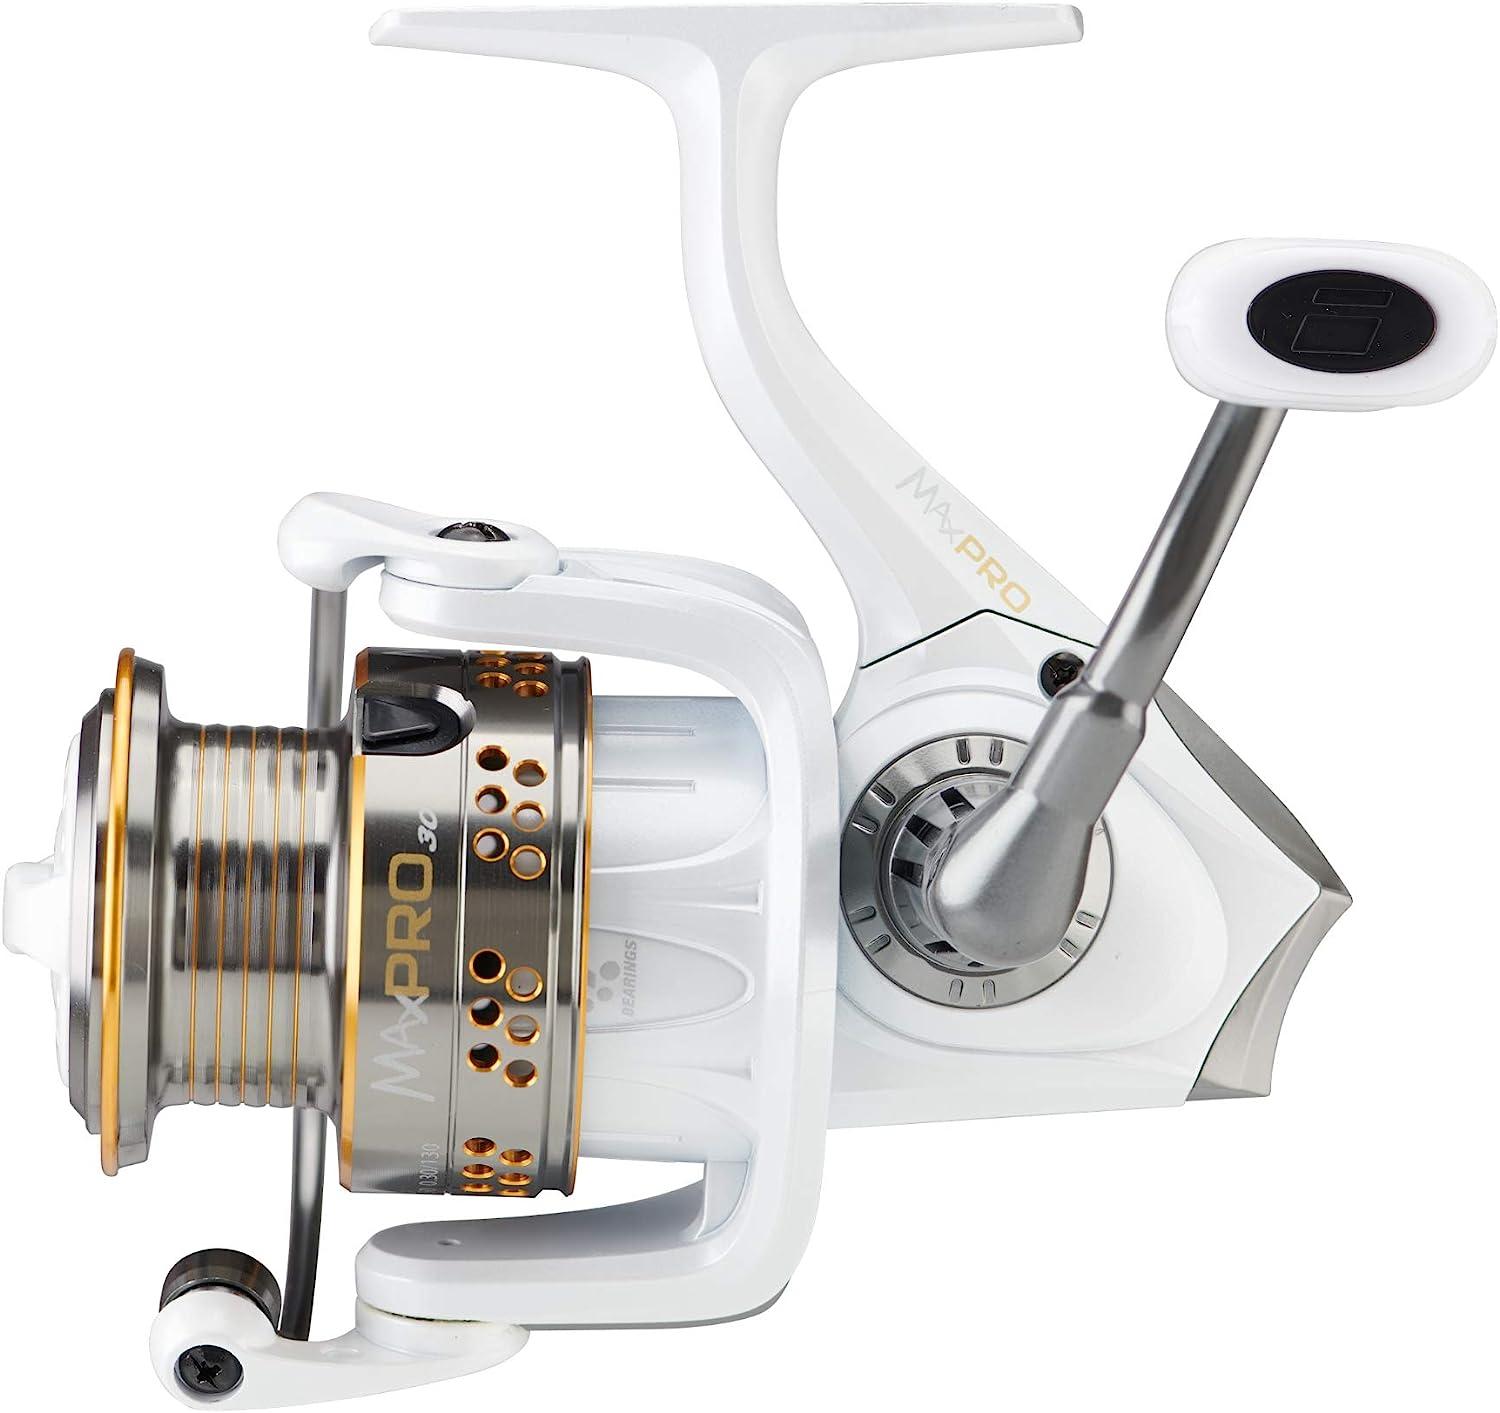 Abu Garcia Max Pro Spinning Reel, Size 60, Right/Left Handle Position,  Graphite Body, Corrosion-Resistant, Machined Aluminum Spool, Front Drag  System Max Pro (New Model) 10 - Box